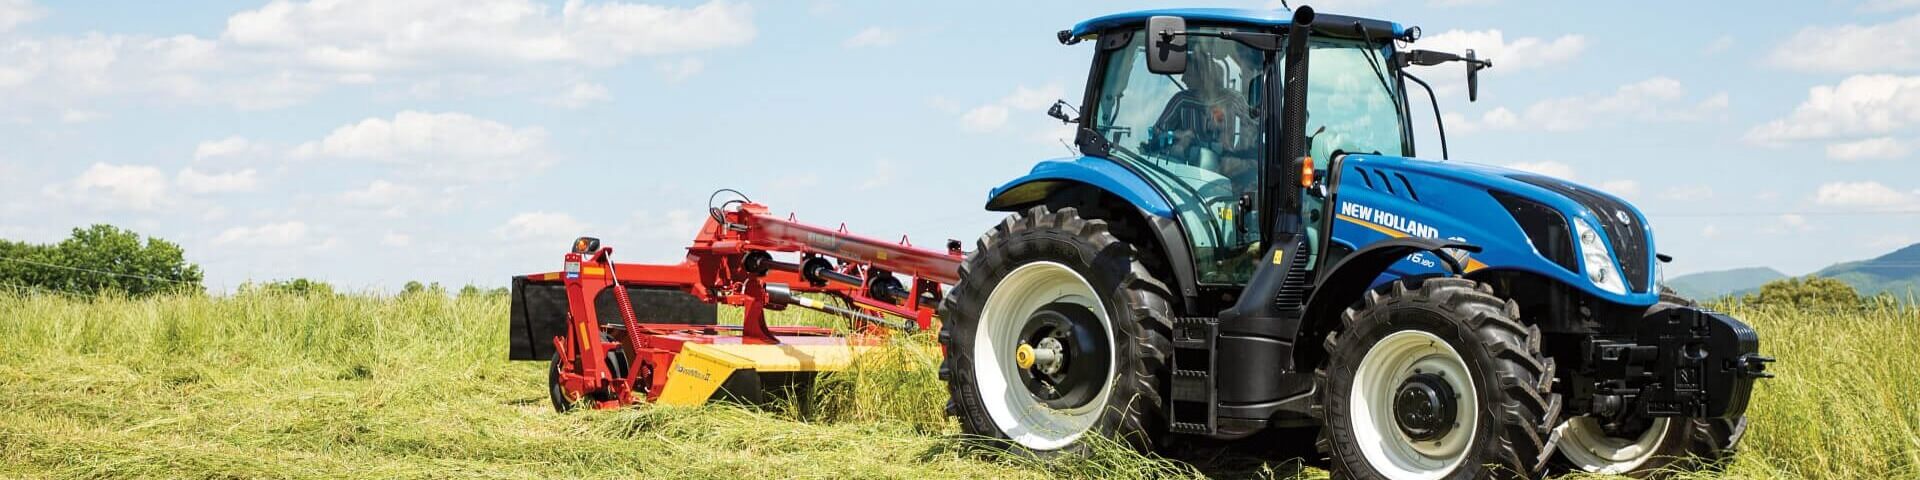 special offers on tractors and telehandlers